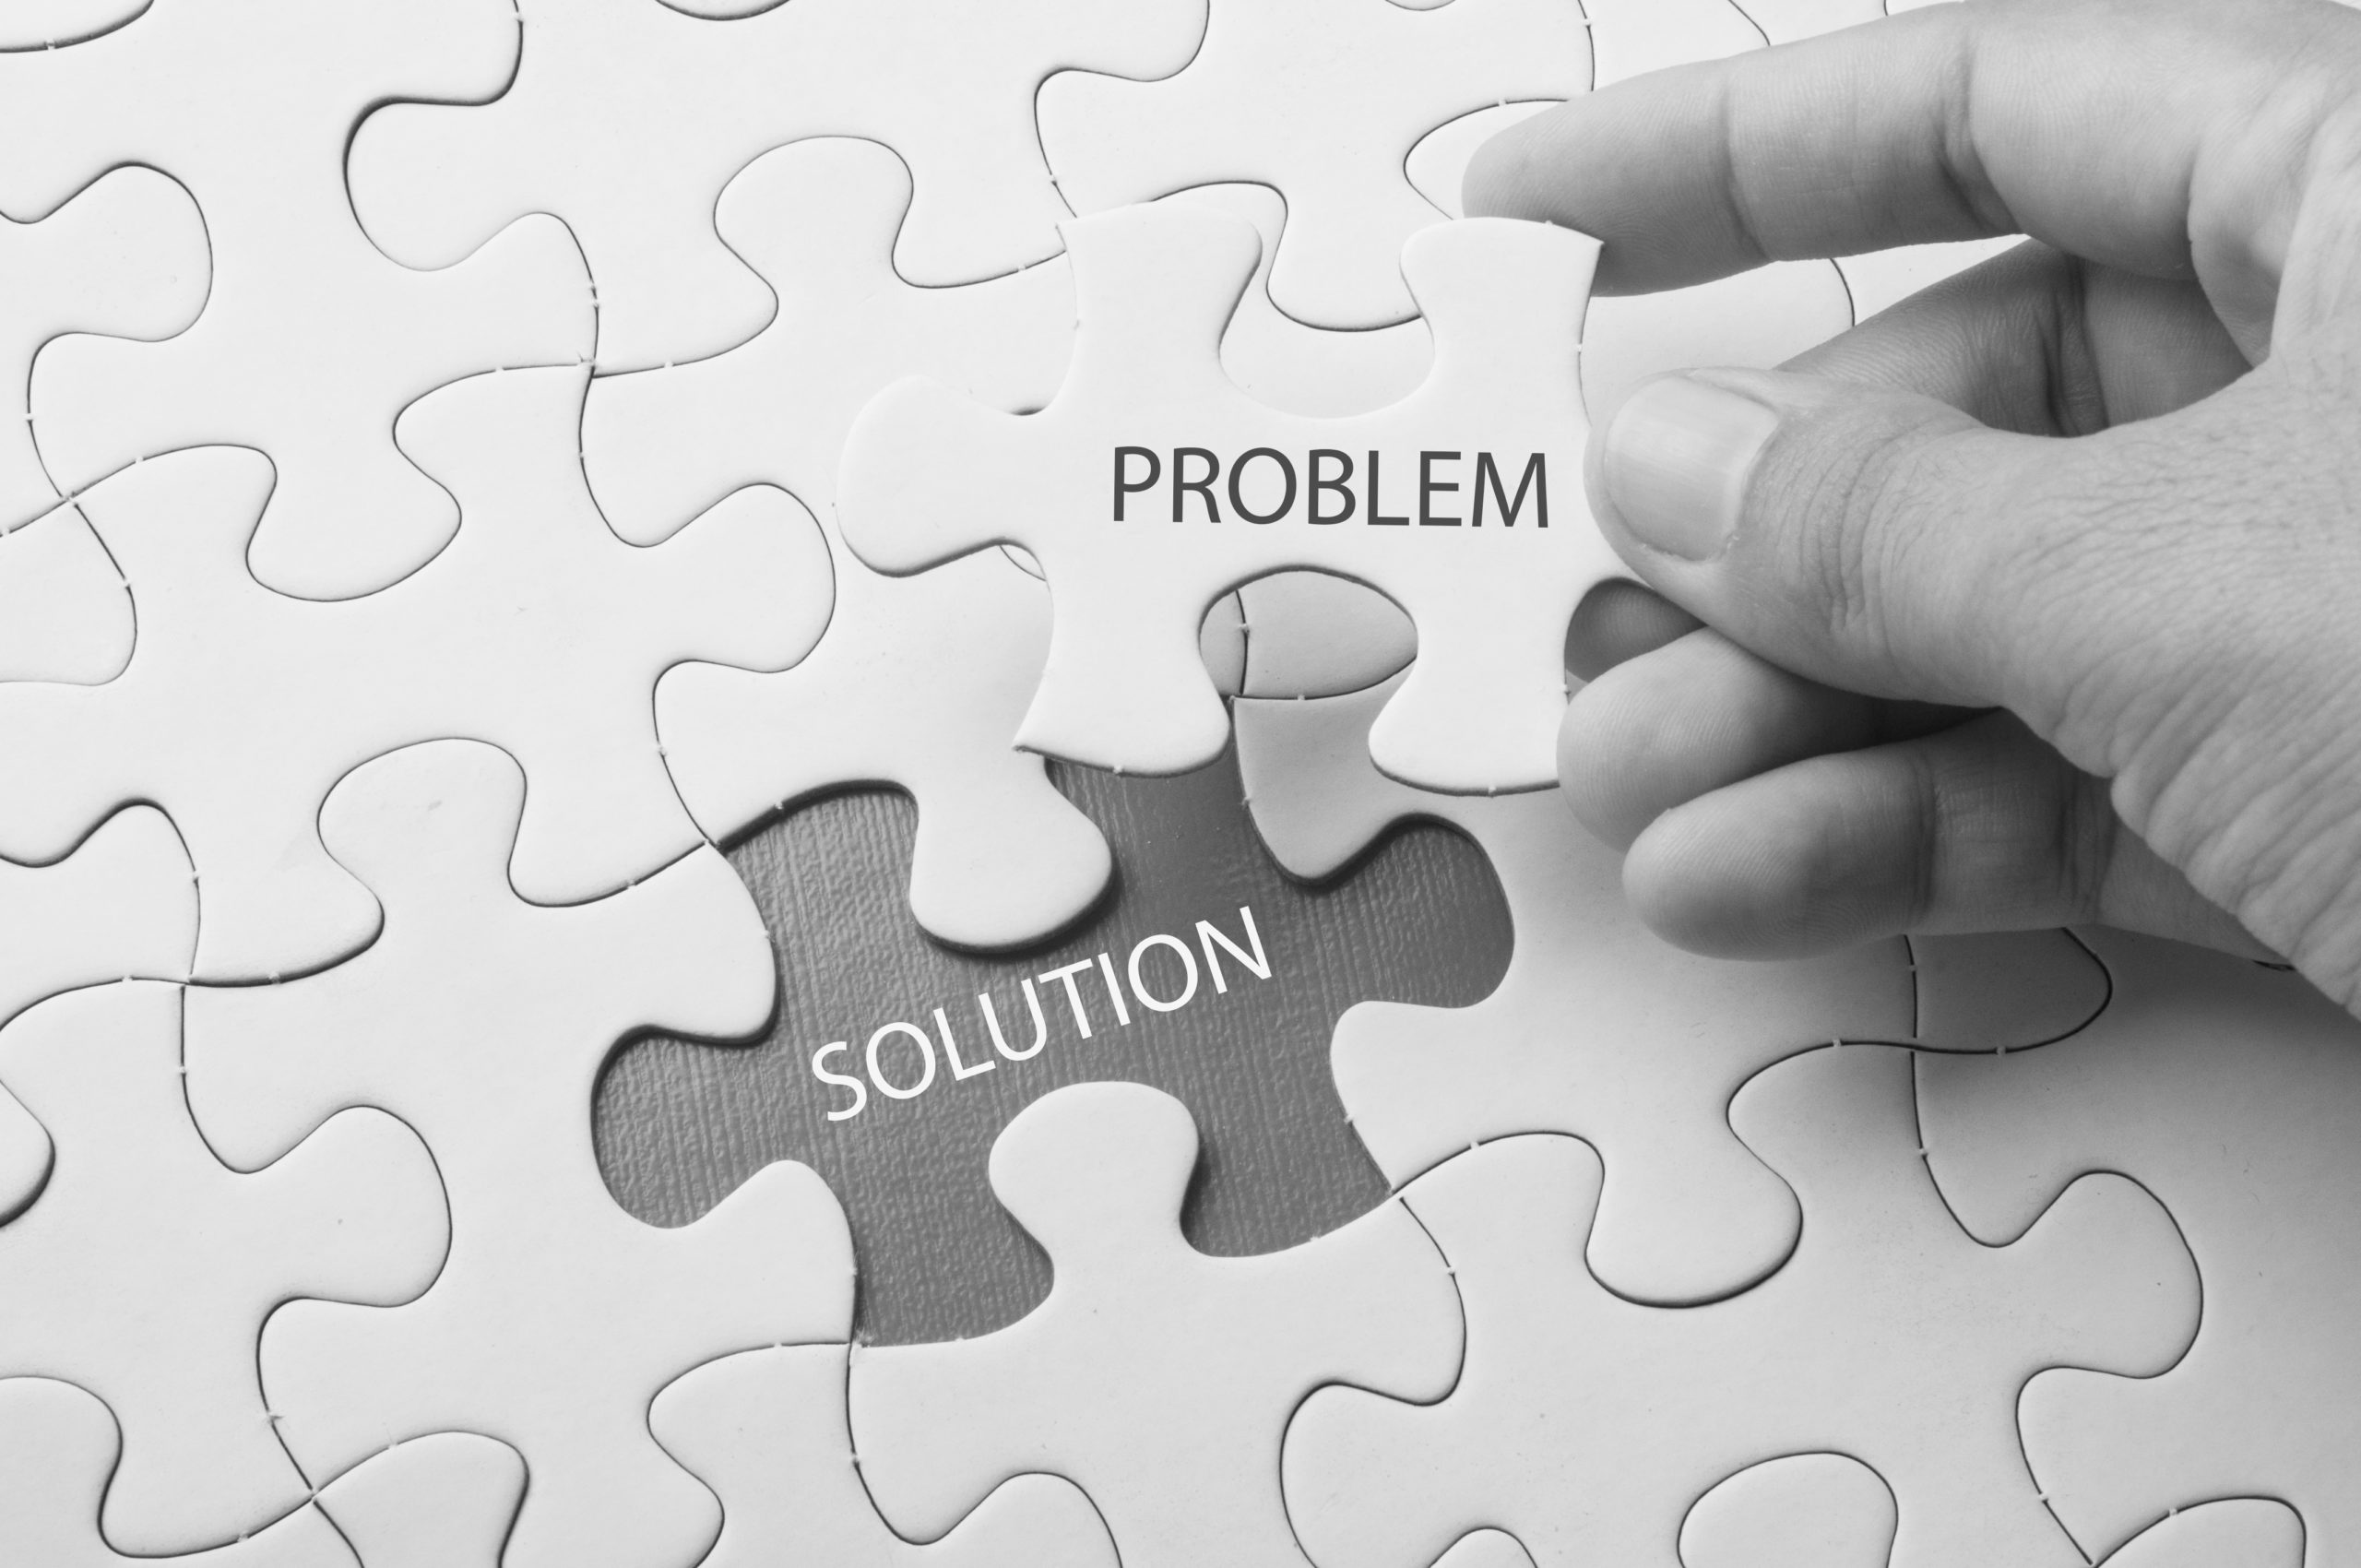 Puzzle pieces that read “solution” and “problem”